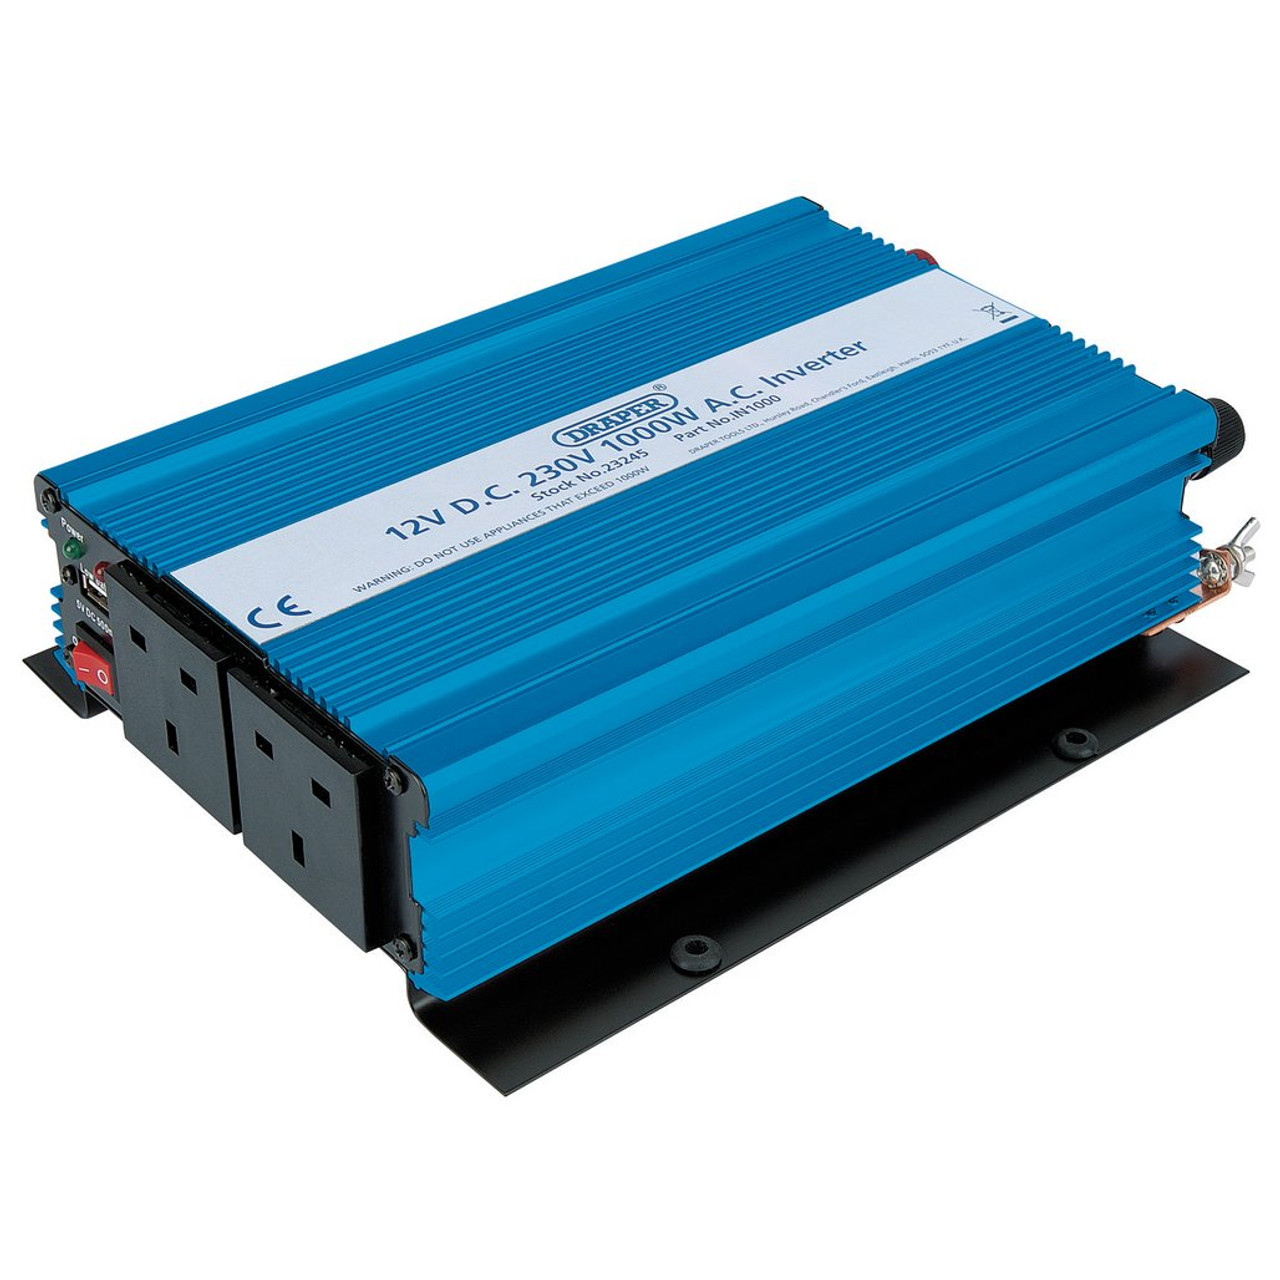 Voltage Converter DC/AC (12 V - 230 V/2000 W) USB, Electronic accessories  wholesaler with top brands